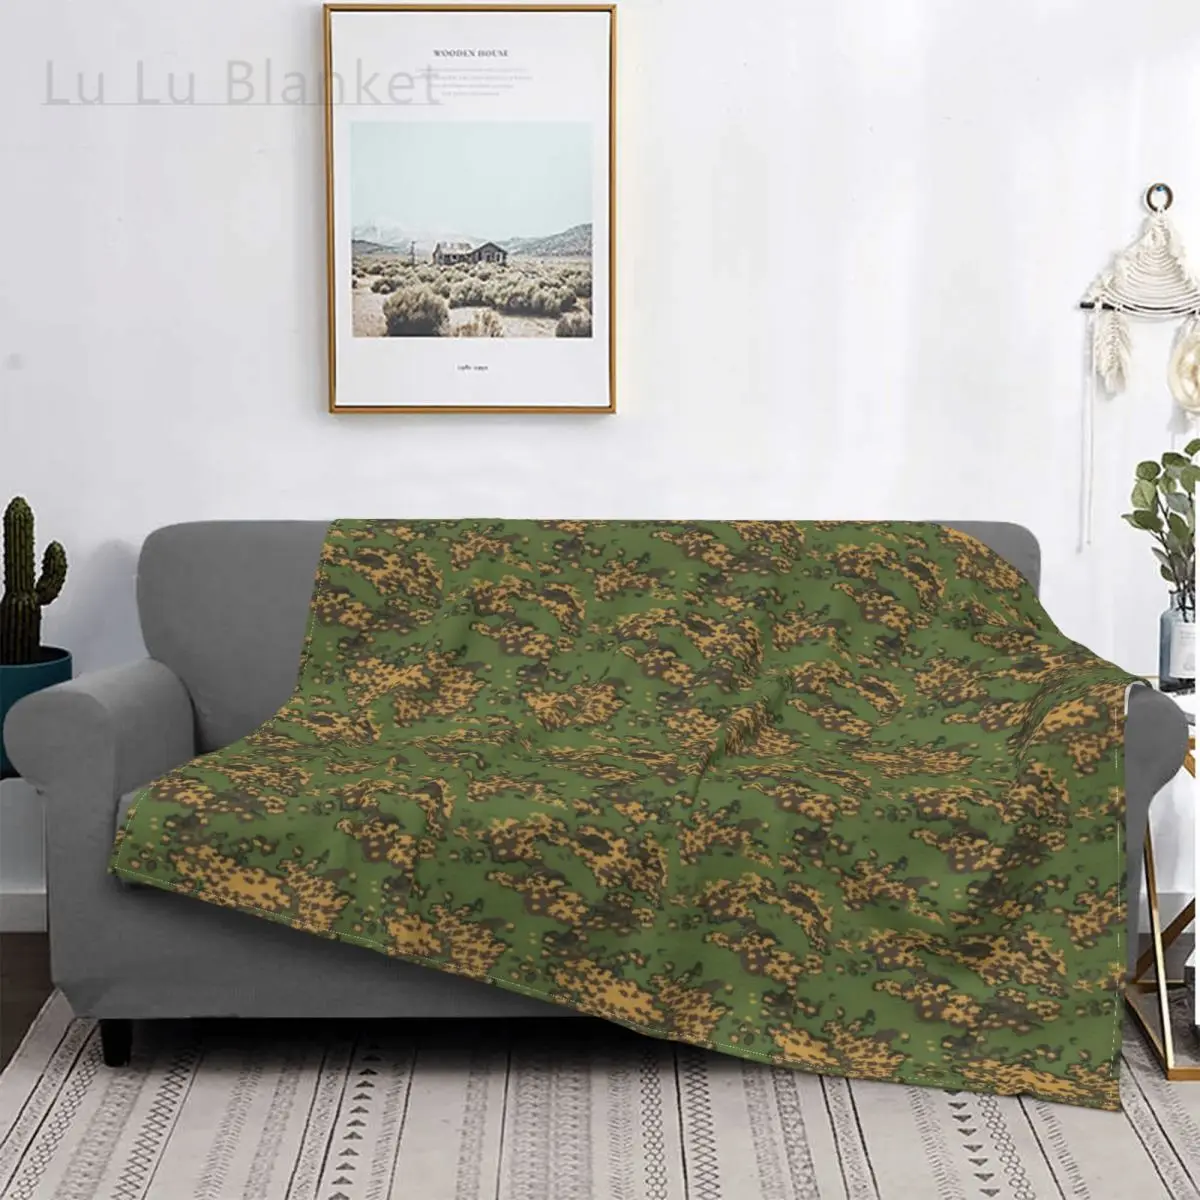 

Russian Woodland Camouflage Russian Blanket Fleece Autumn/Winter Popular Super Soft Throw Blanket for Bed Travel Quilt